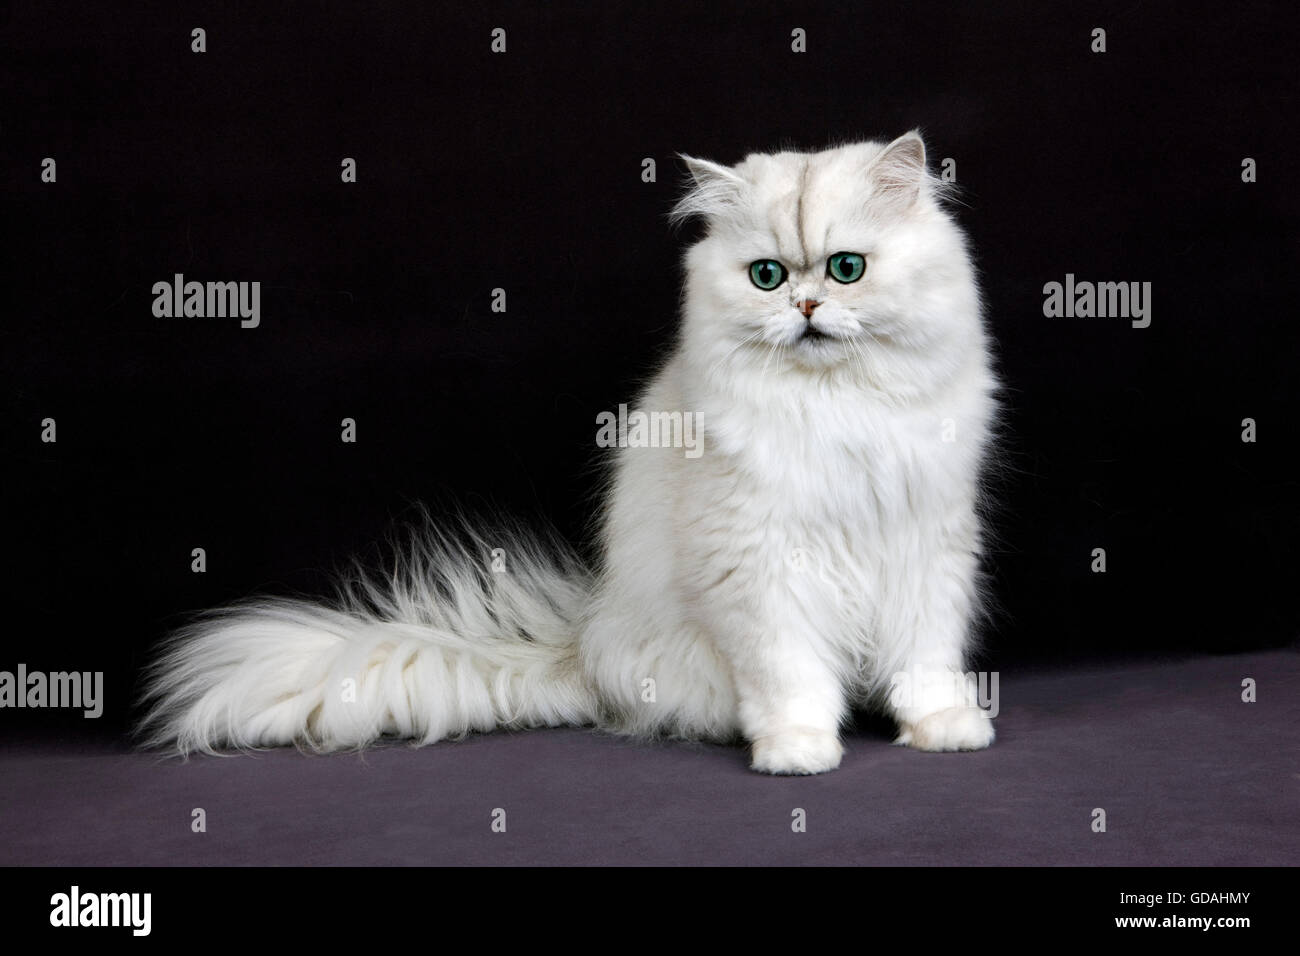 CHINCHILLA PERSIAN CAT, ADULT WITH GREEN EYES Stock Photo